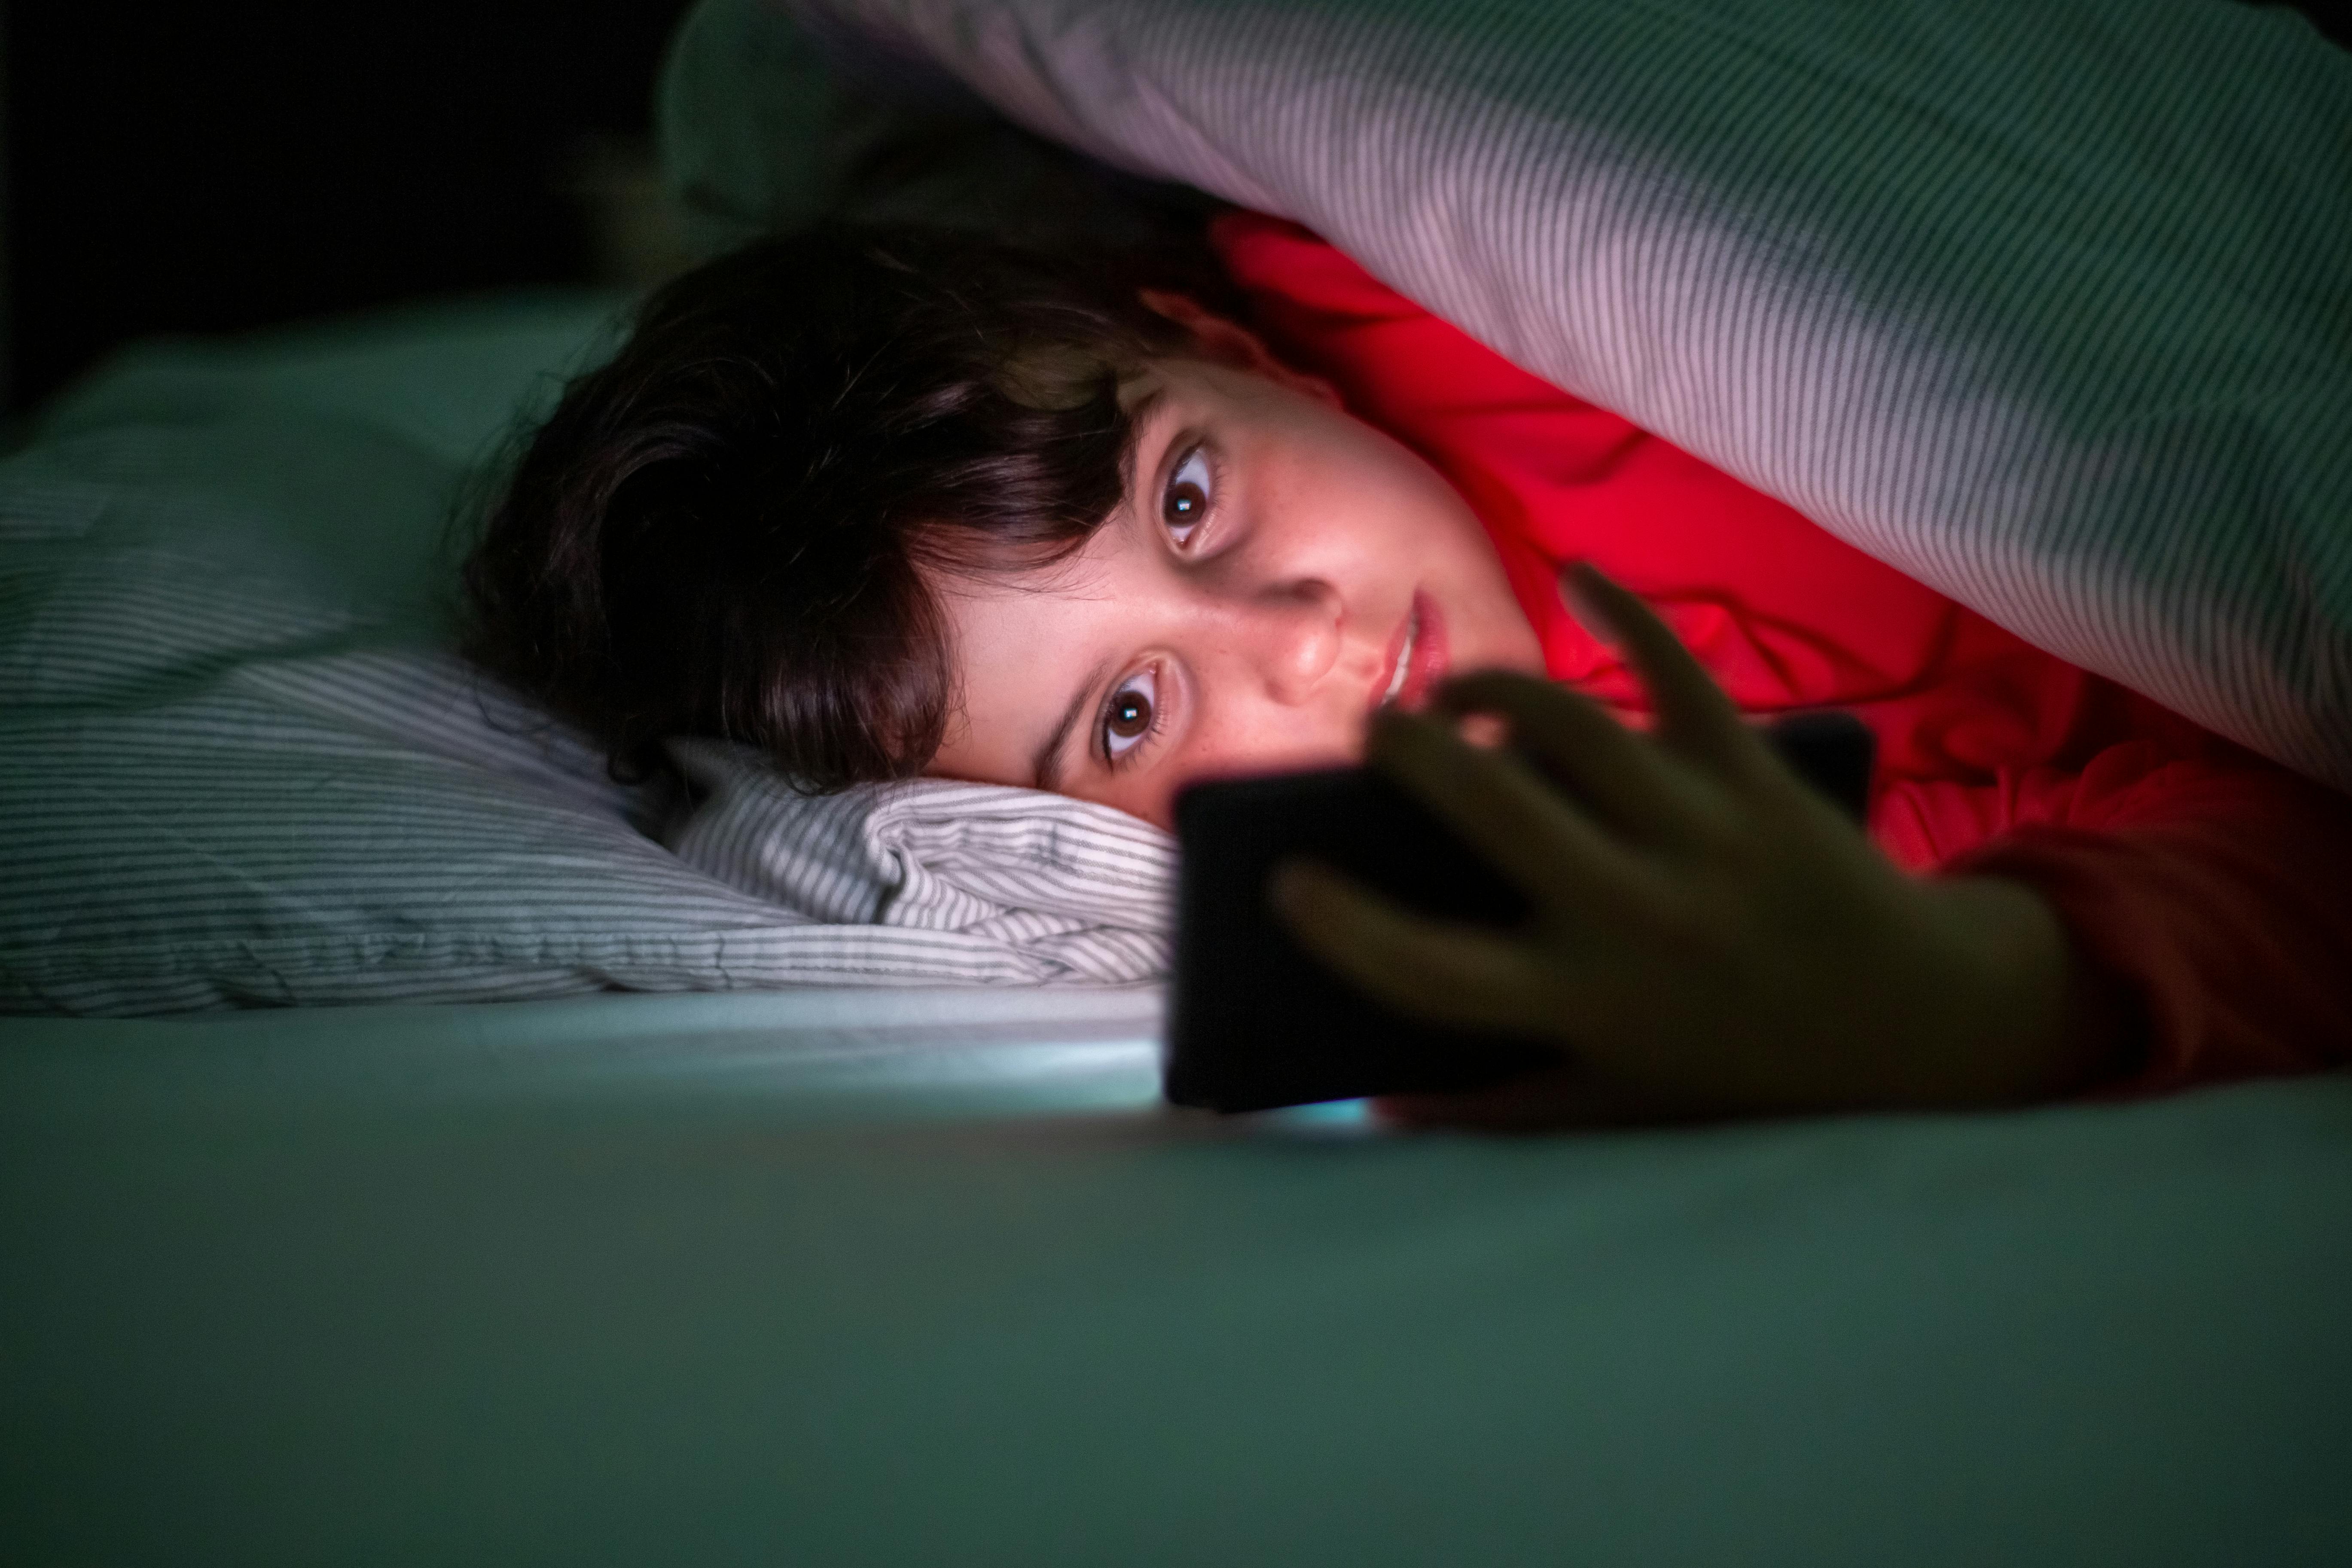 How is digital technology affecting our kids’ sleep?